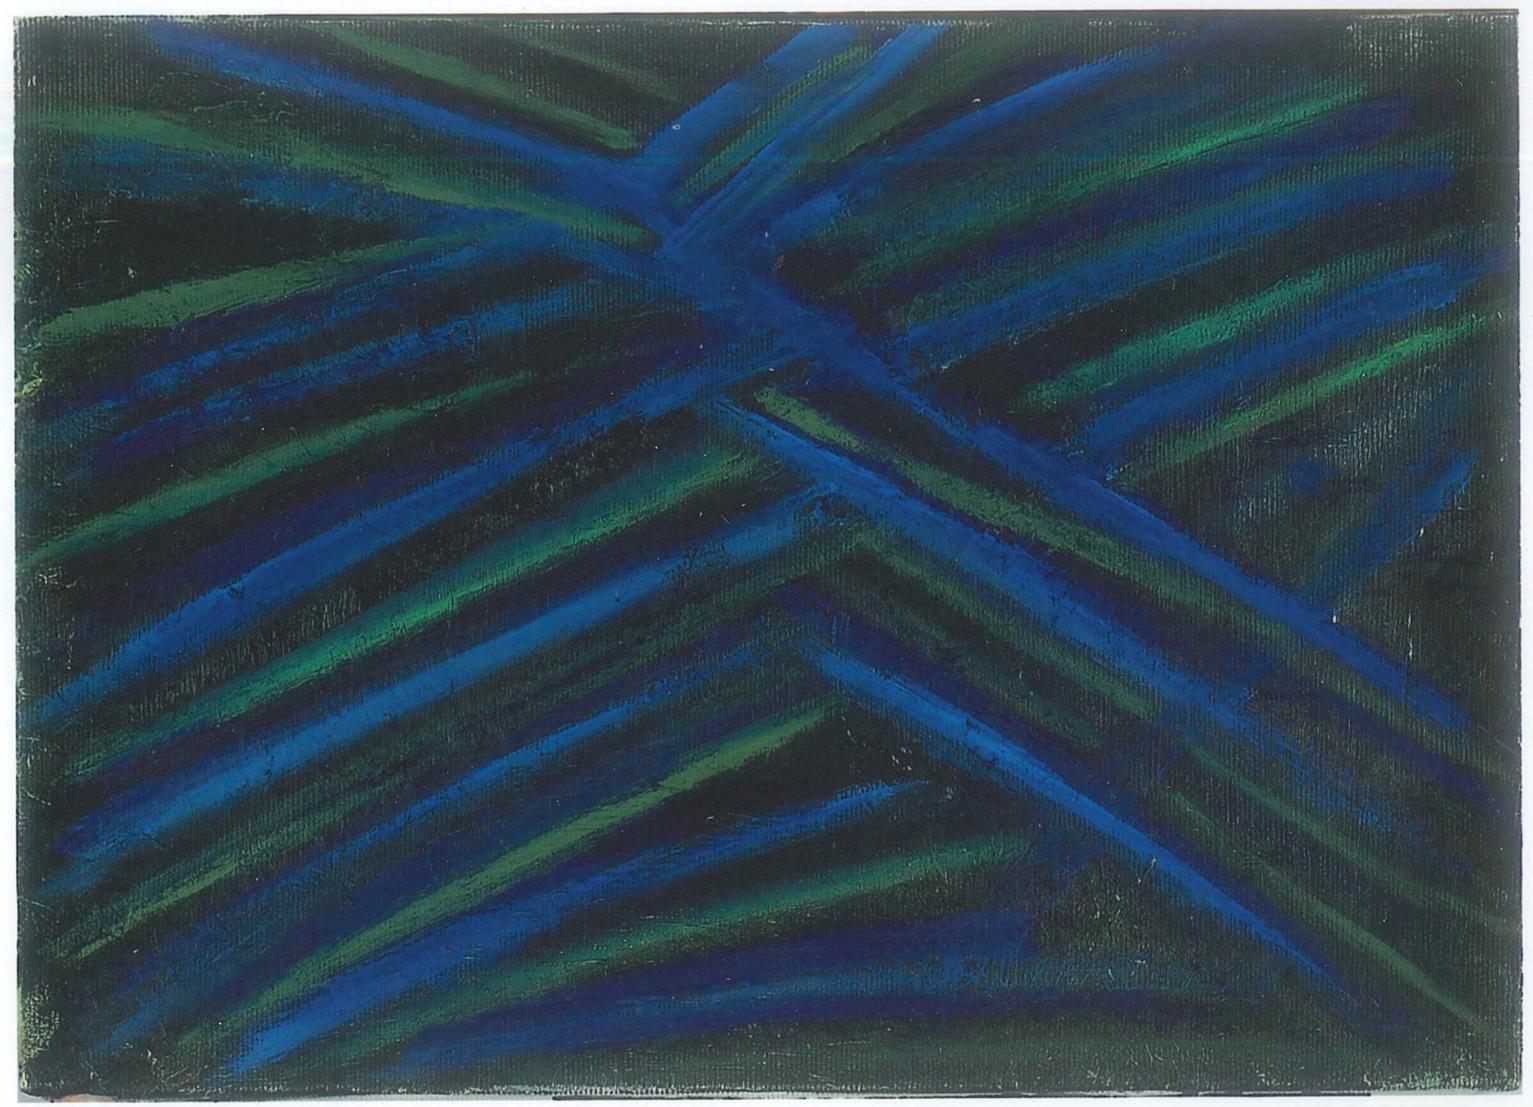 Informal Painting is an original artwork realized by Giorgio Lo Fermo in 2011.

Mixed media on canvas. Hand signed by the artist on lower left. 

This contemporary artwork is composed by multi-concentric bands on the dark tones of blue, green and